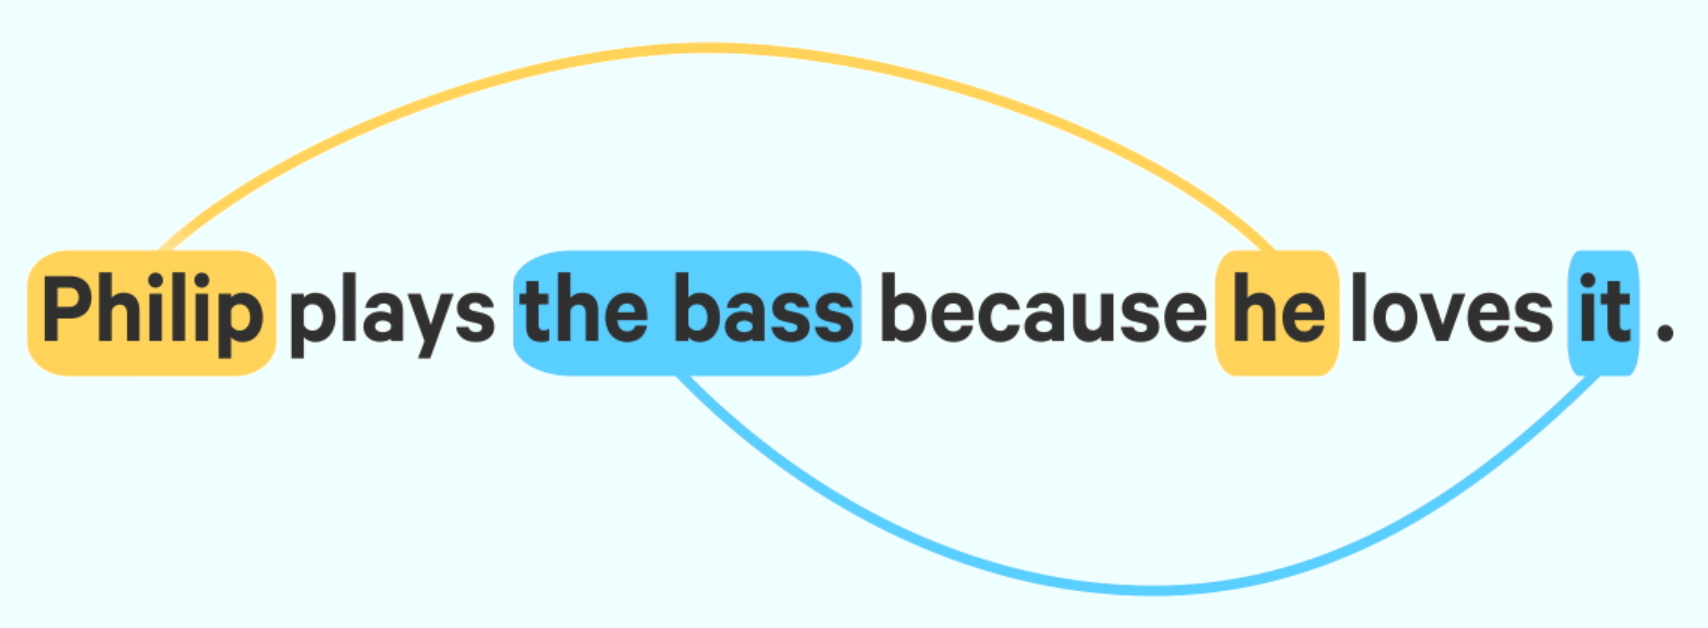 Example of coreference in a sentence: "Philip plays the bass because he loves it." -> "Philip and "he" are coreferent, and "the bass" and "it" are coreferent as well.